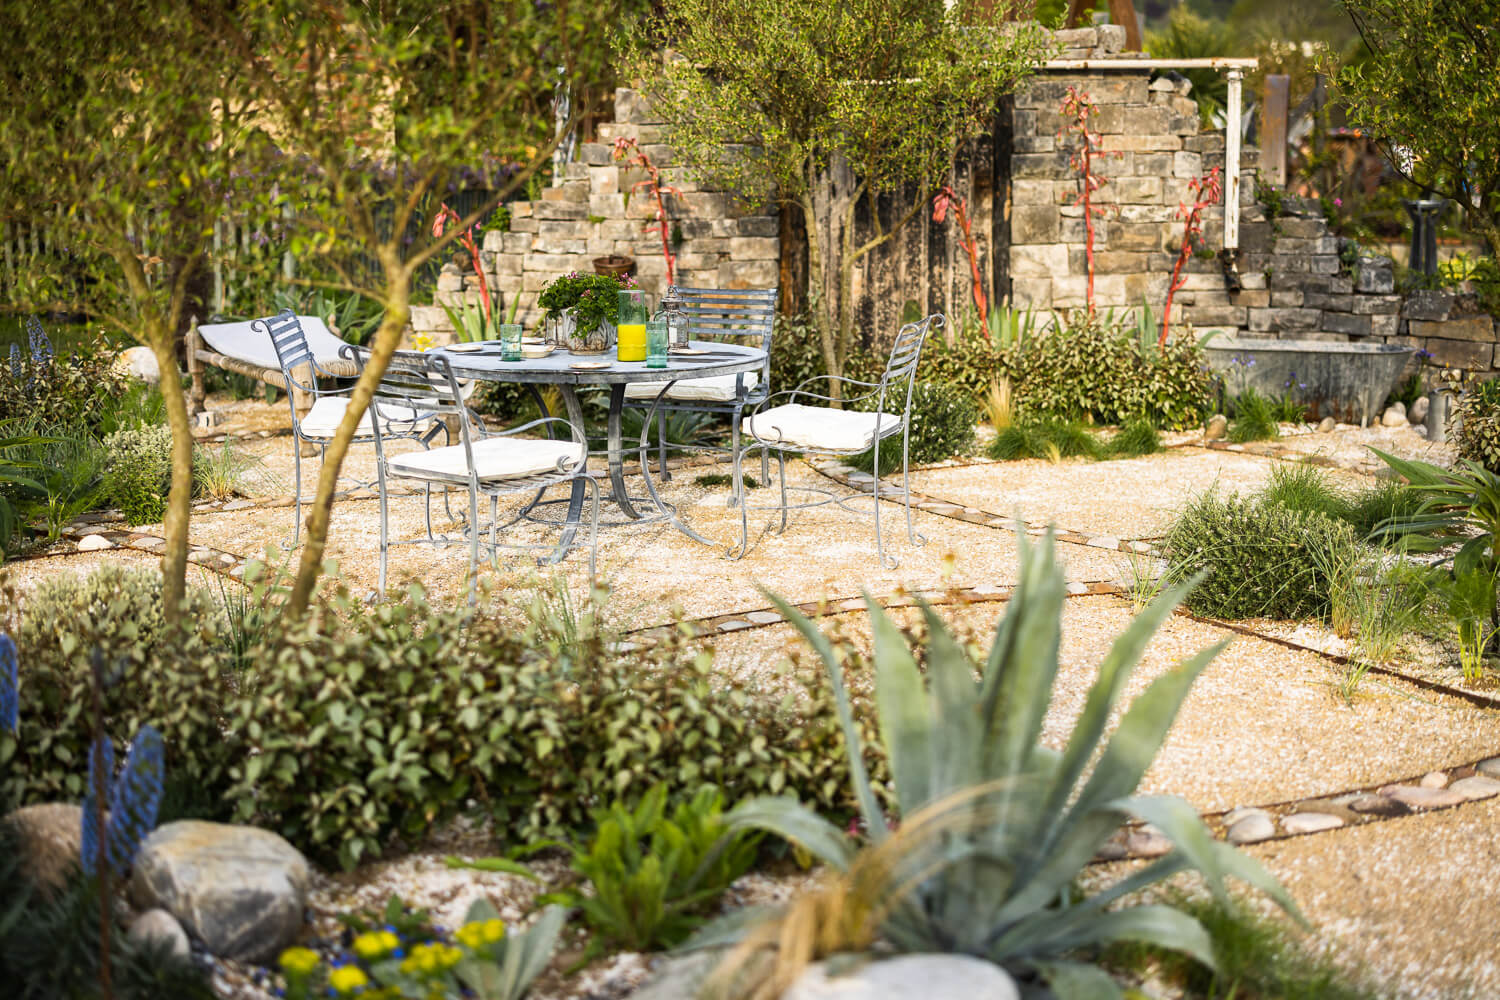 The Home Away Garden, a drought tolerant RHS award-winning show garden with a Harrod Horticulture steel table and chairs. Designed by April House – Award Winning Cotswolds Garden Design